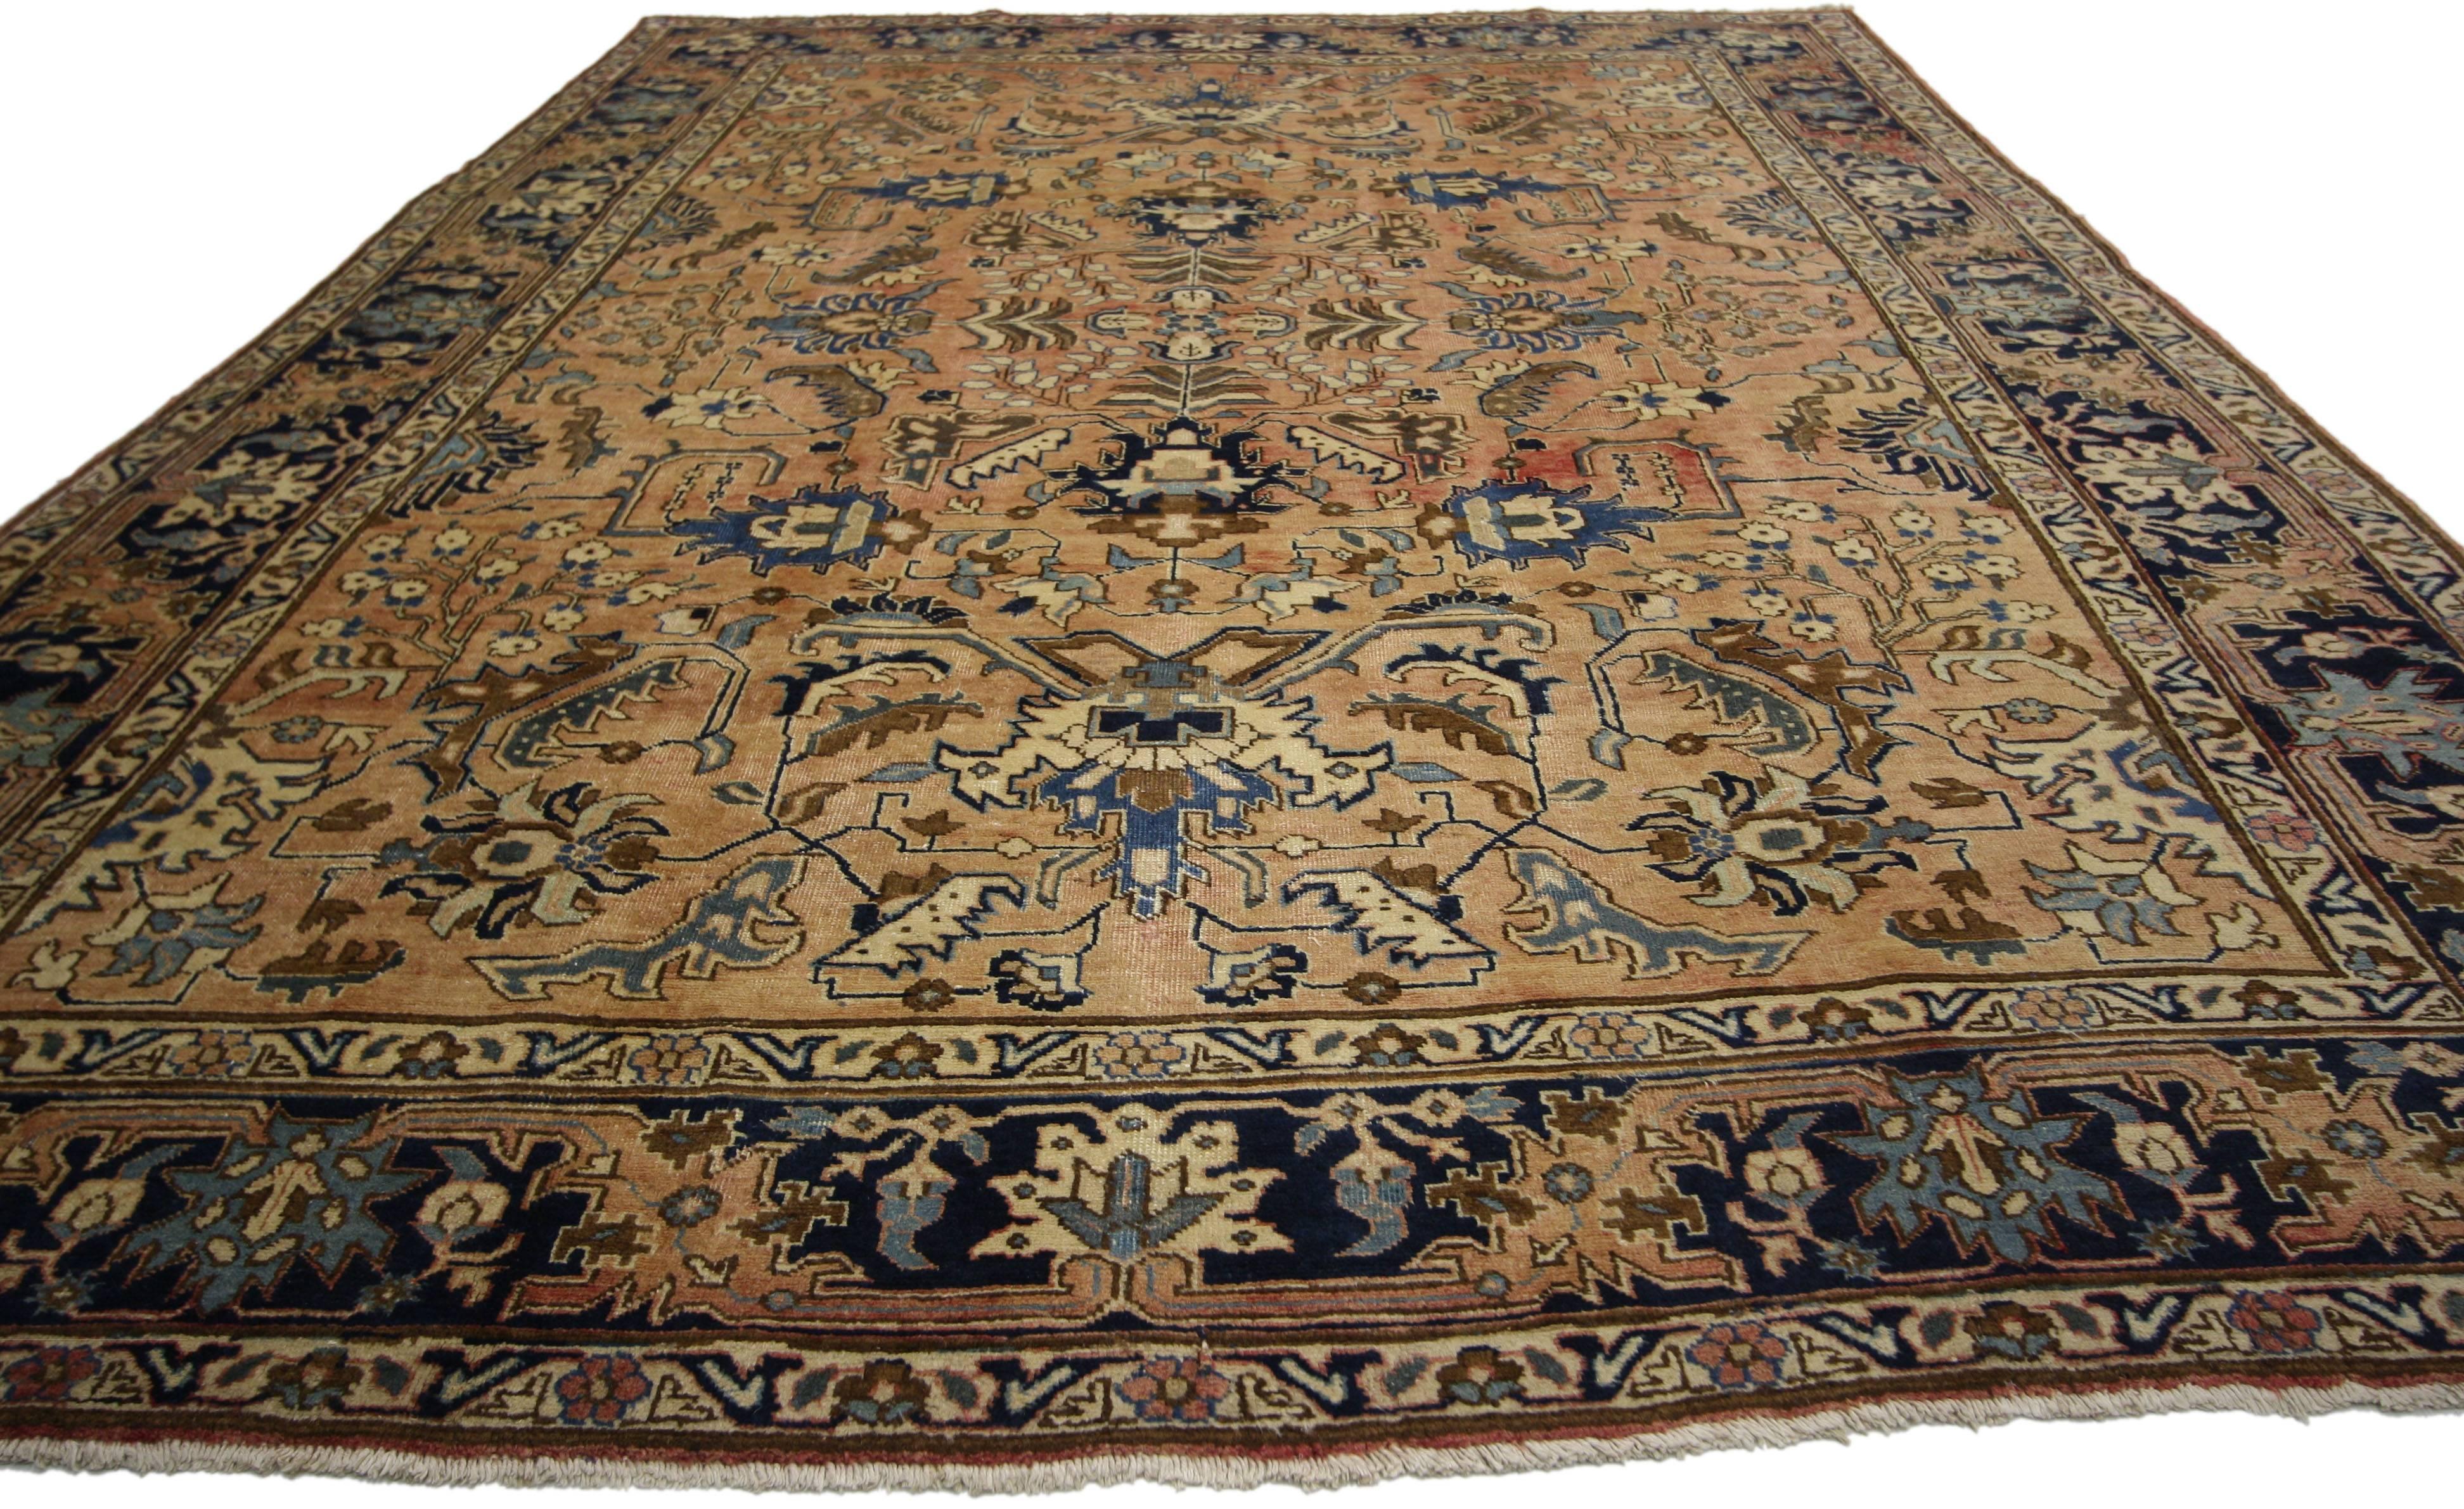 75337 vintage Persian Tabriz rug with traditional style. This hand-knotted wool vintage Persian Tabriz rug features an allover pattern surrounded by a classic border creating a well-balanced and timeless design. This vintage Persian Tabriz rug